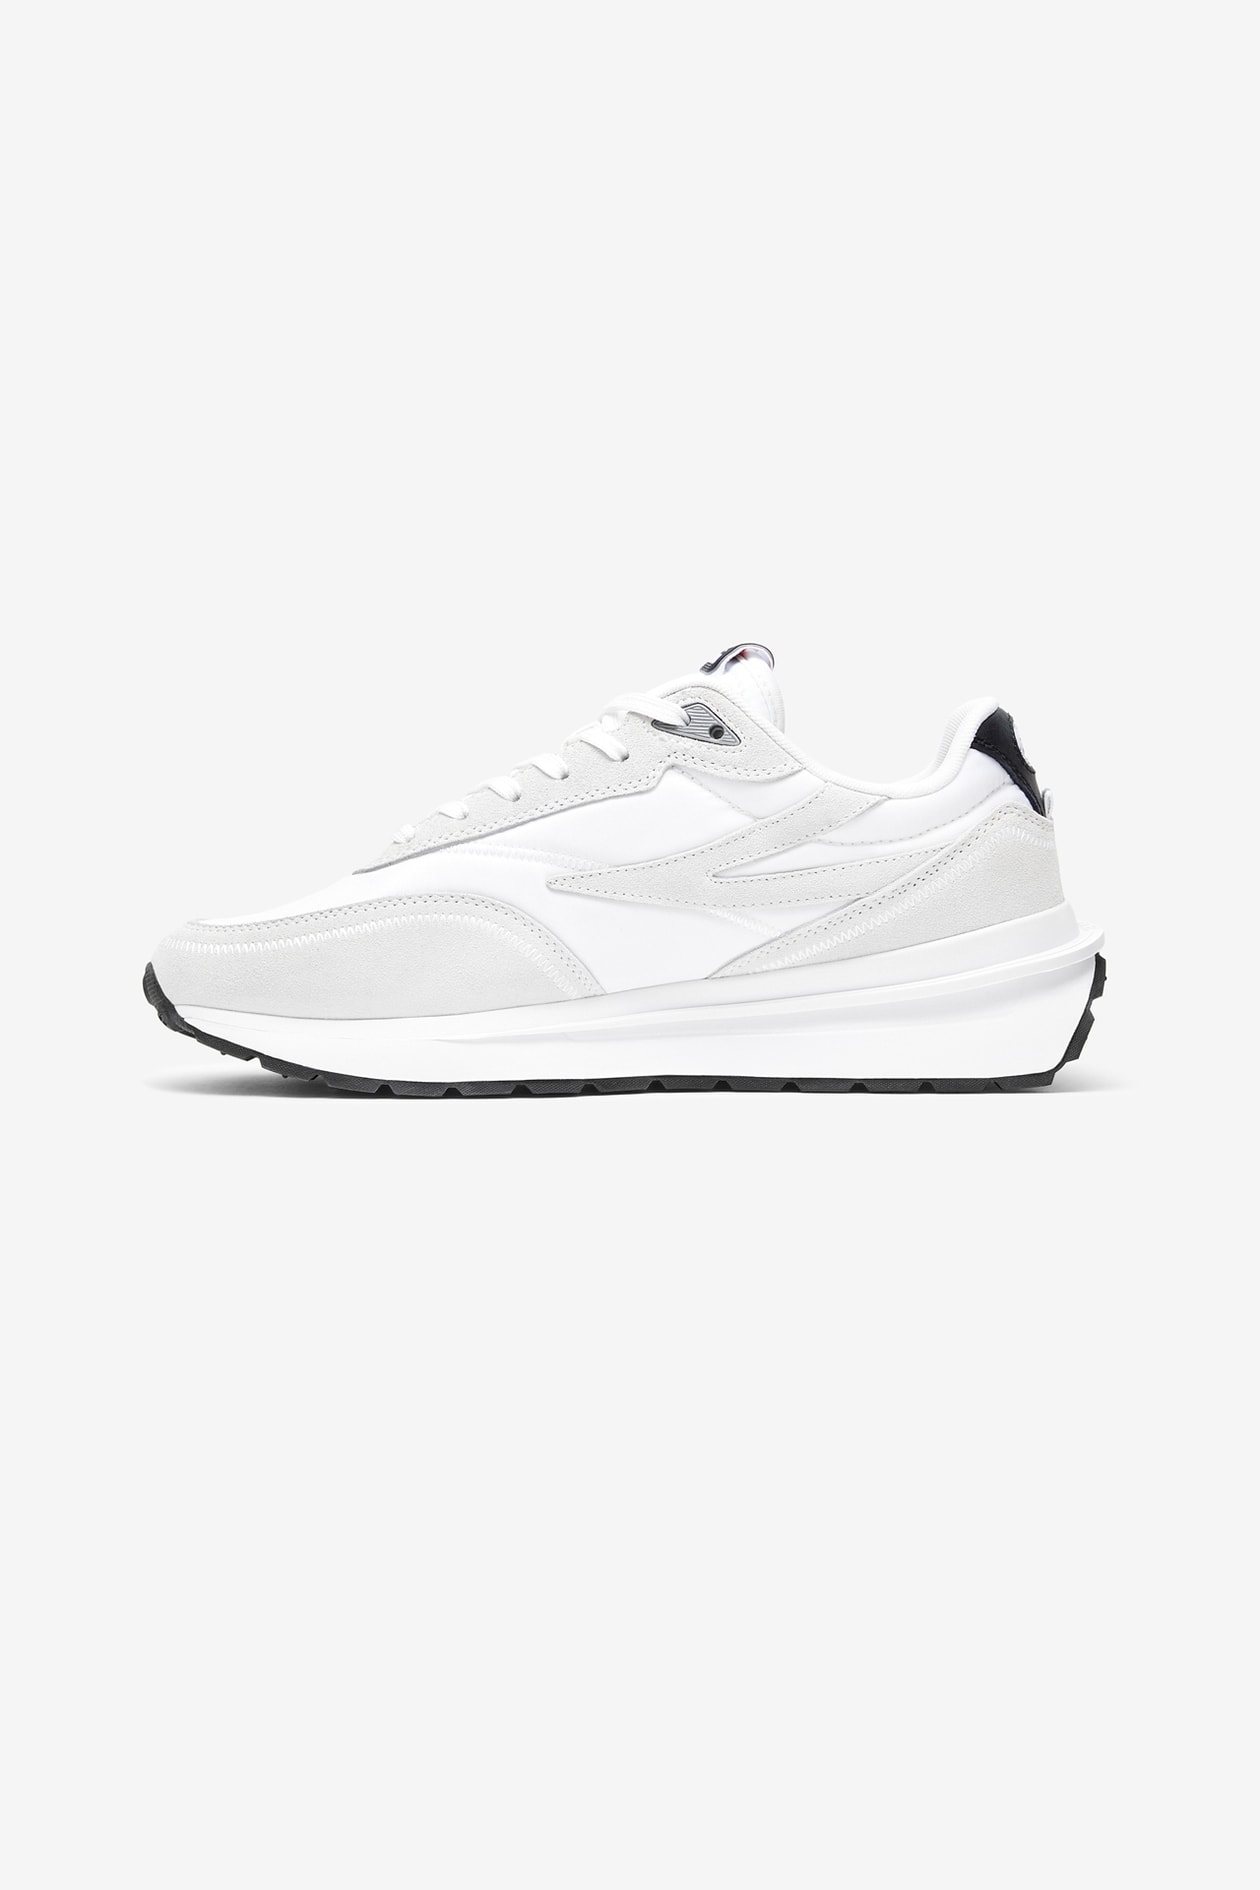 black, white, metallic and silver colorways both men and women “Whisper White” colorway, leather upper overlays, engineered knitted tongue and lining flexibility and easy slip-on access neoprene textile backing rubber molded heel tongue branding micro-grain nylon underlays